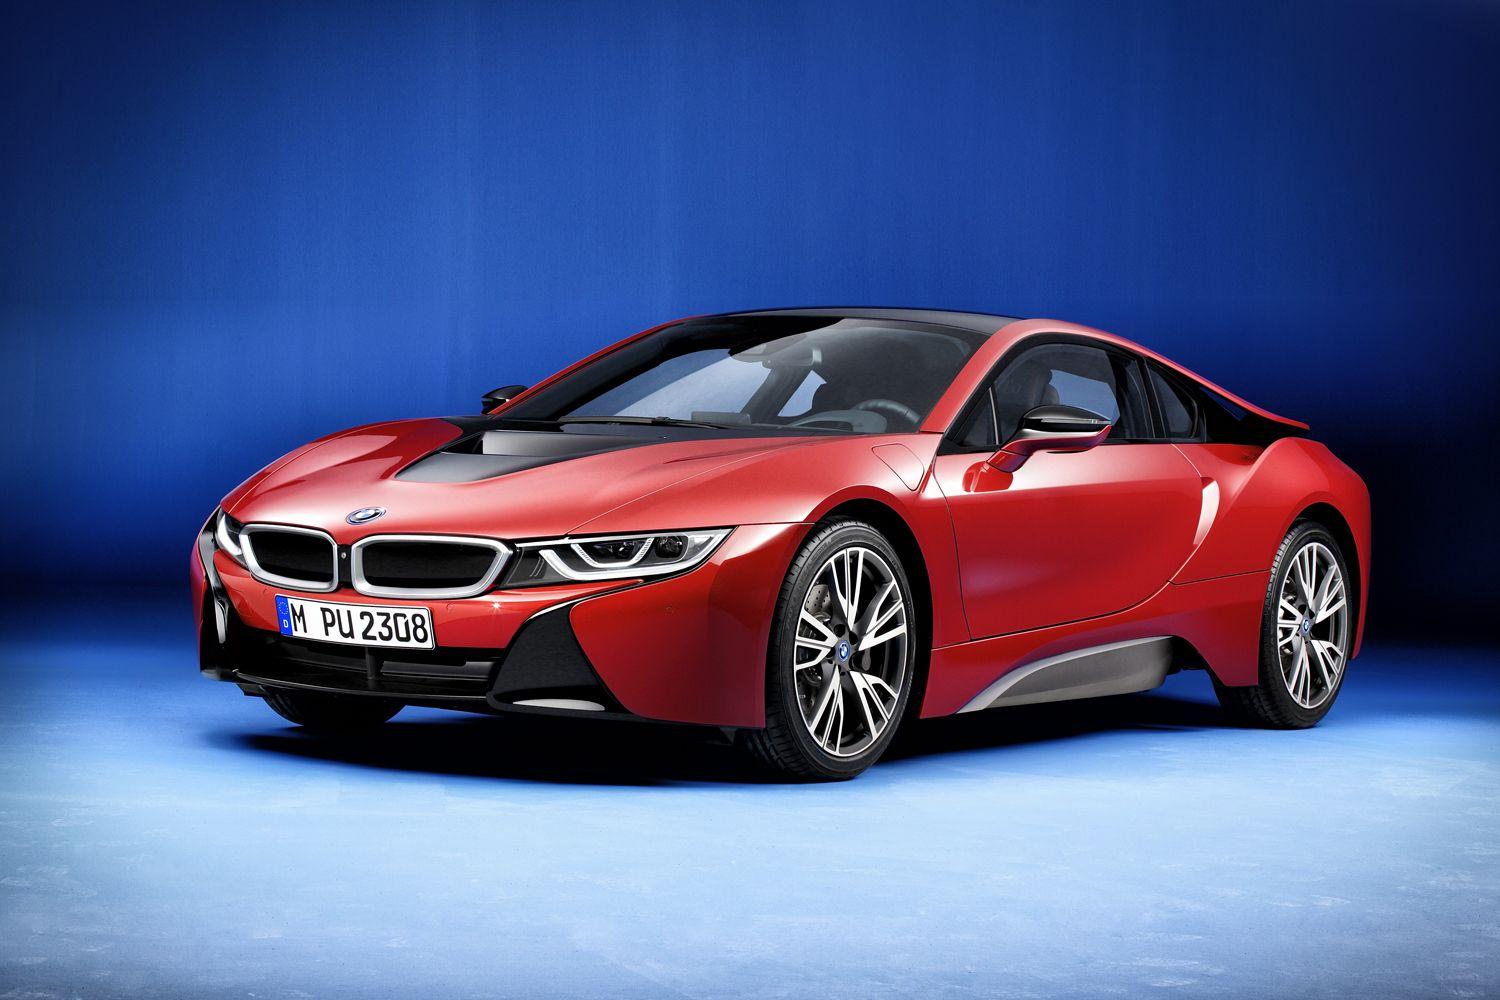 Has the updated version of BMW's futuristic i8 been hiding